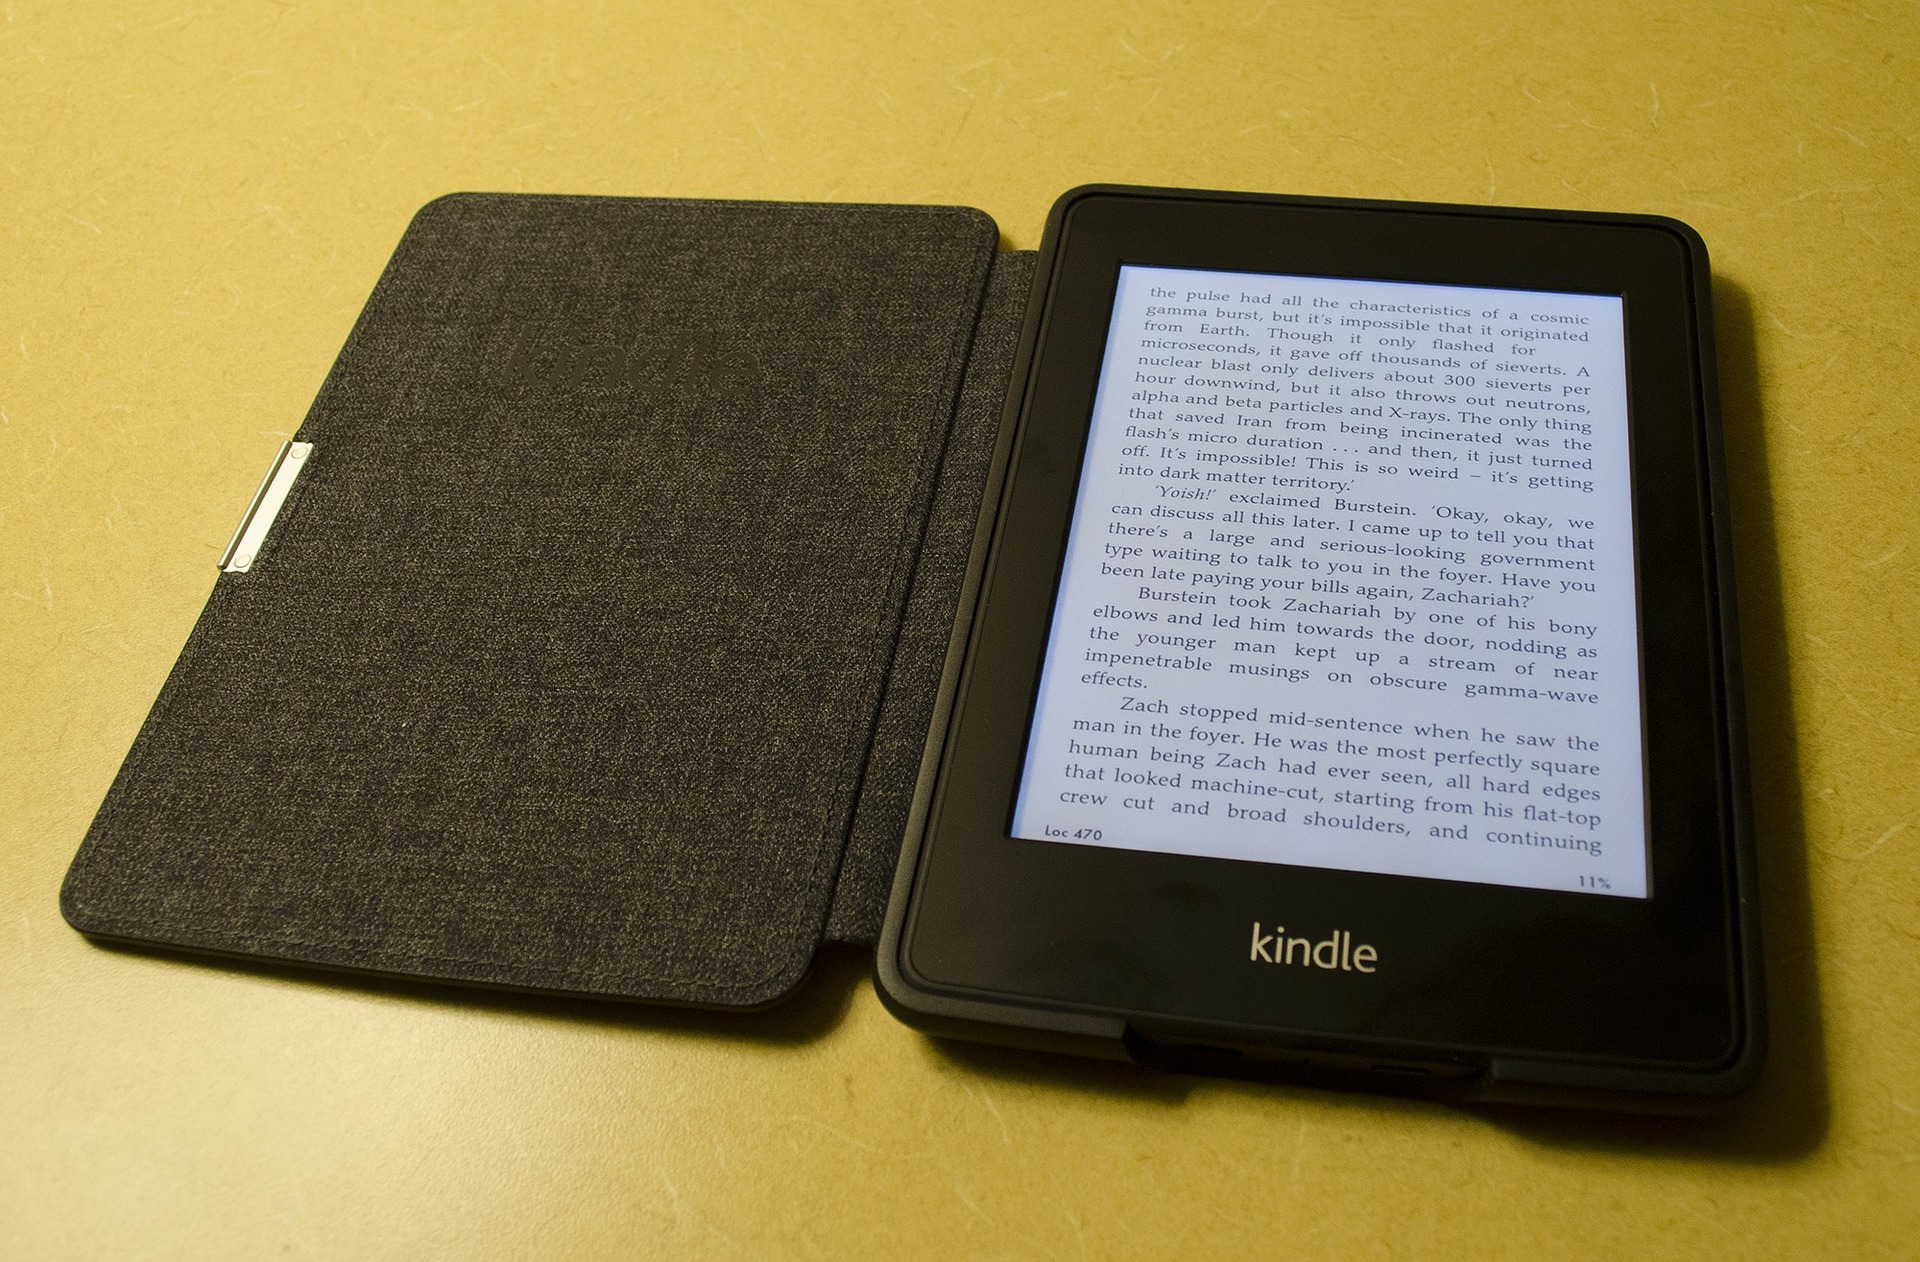 Kindle e-reader open with a book